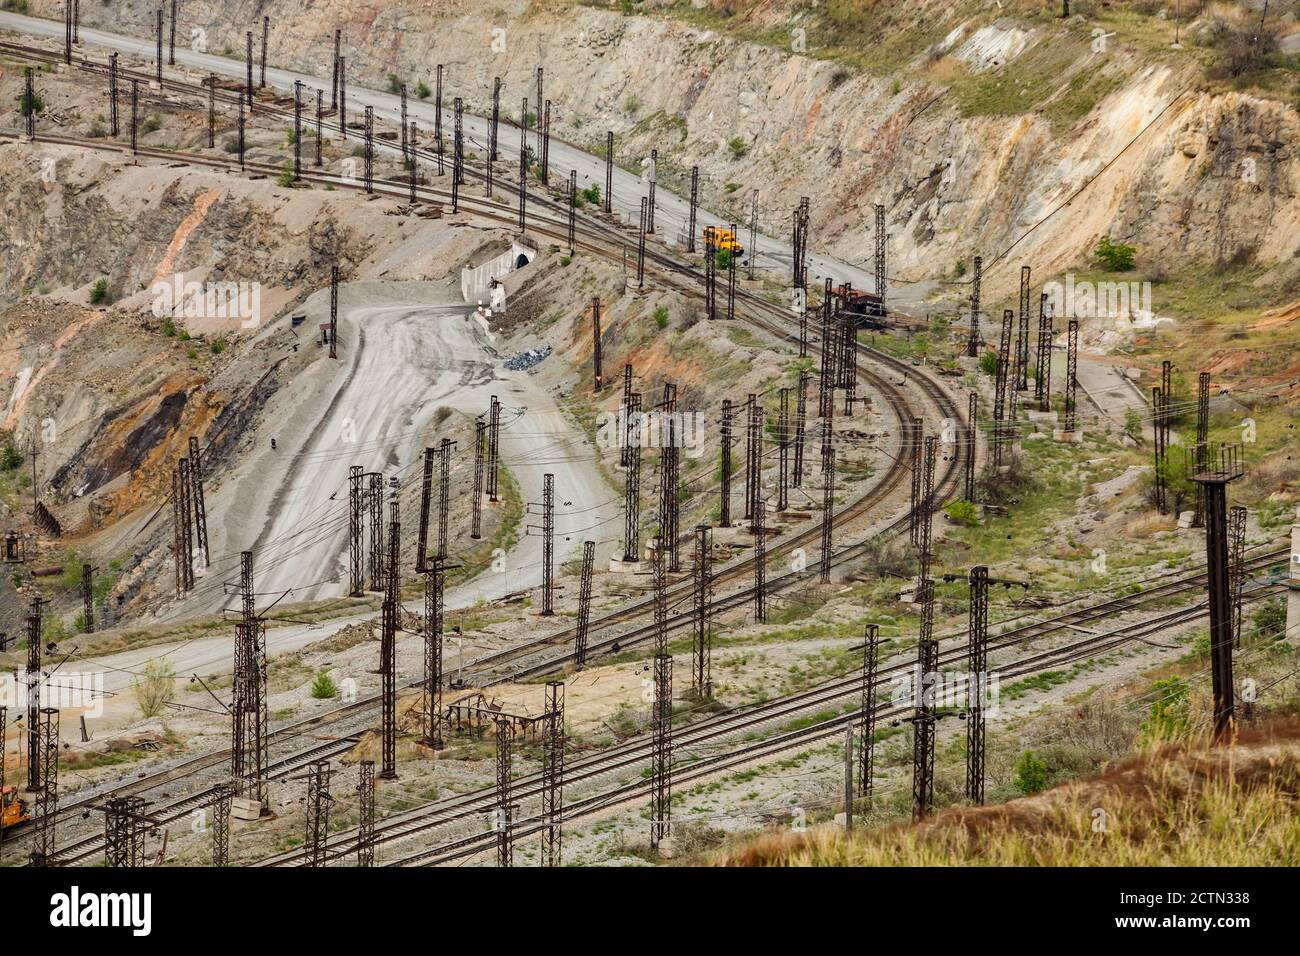 Giant iron ore quarry in Rudny, Kazakhstan.  Mining raw minerals for steel production. Railroad down the quarry. Stock Photo